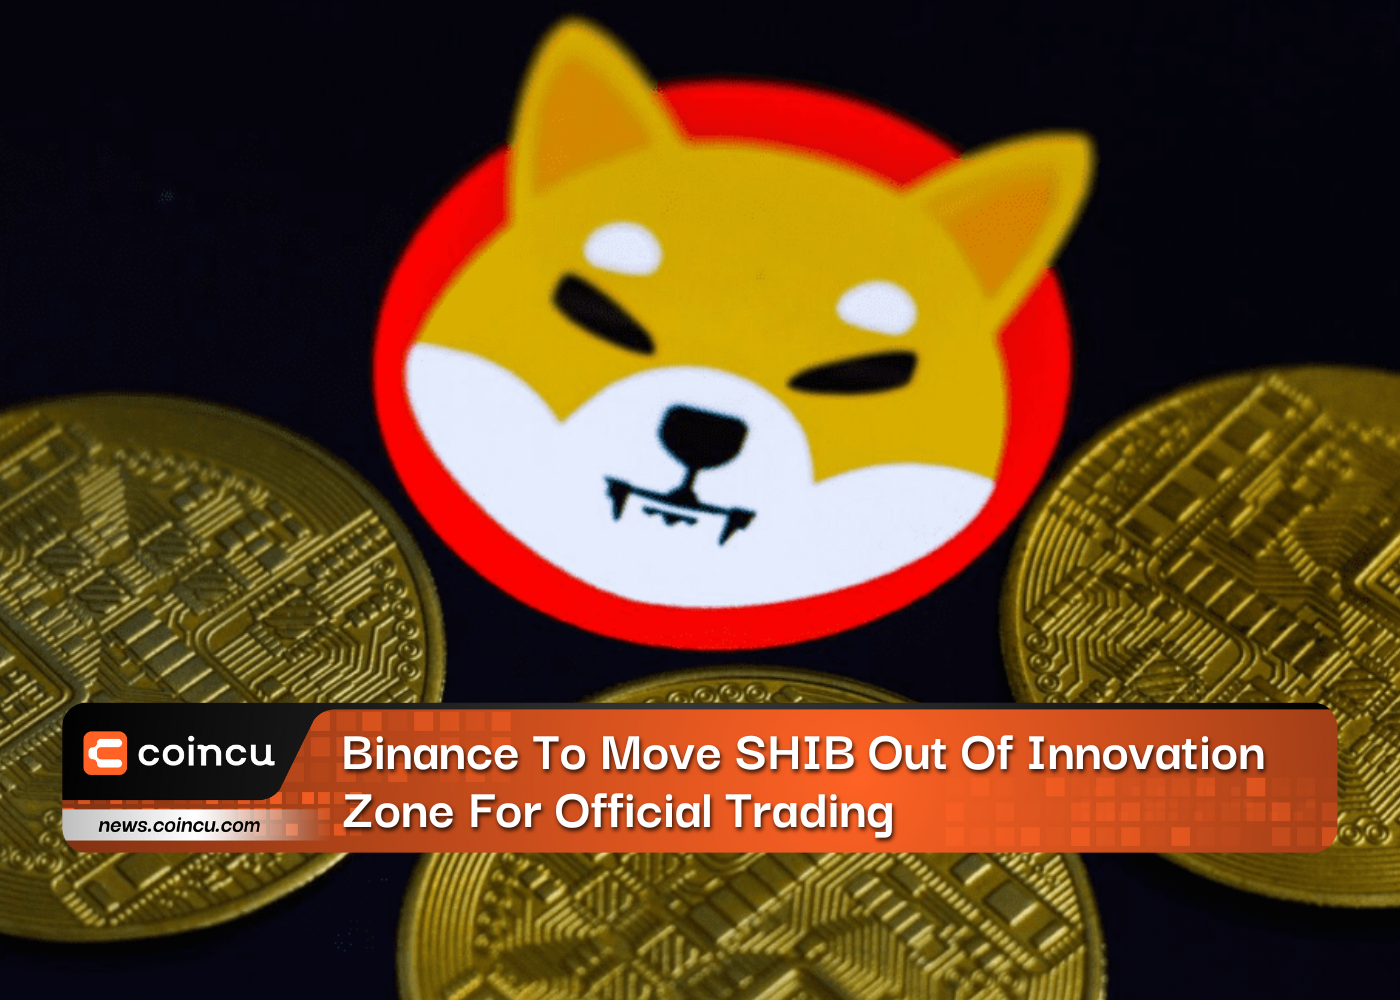 Binance To Move SHIB Out Of Innovation Zone For Official Trading